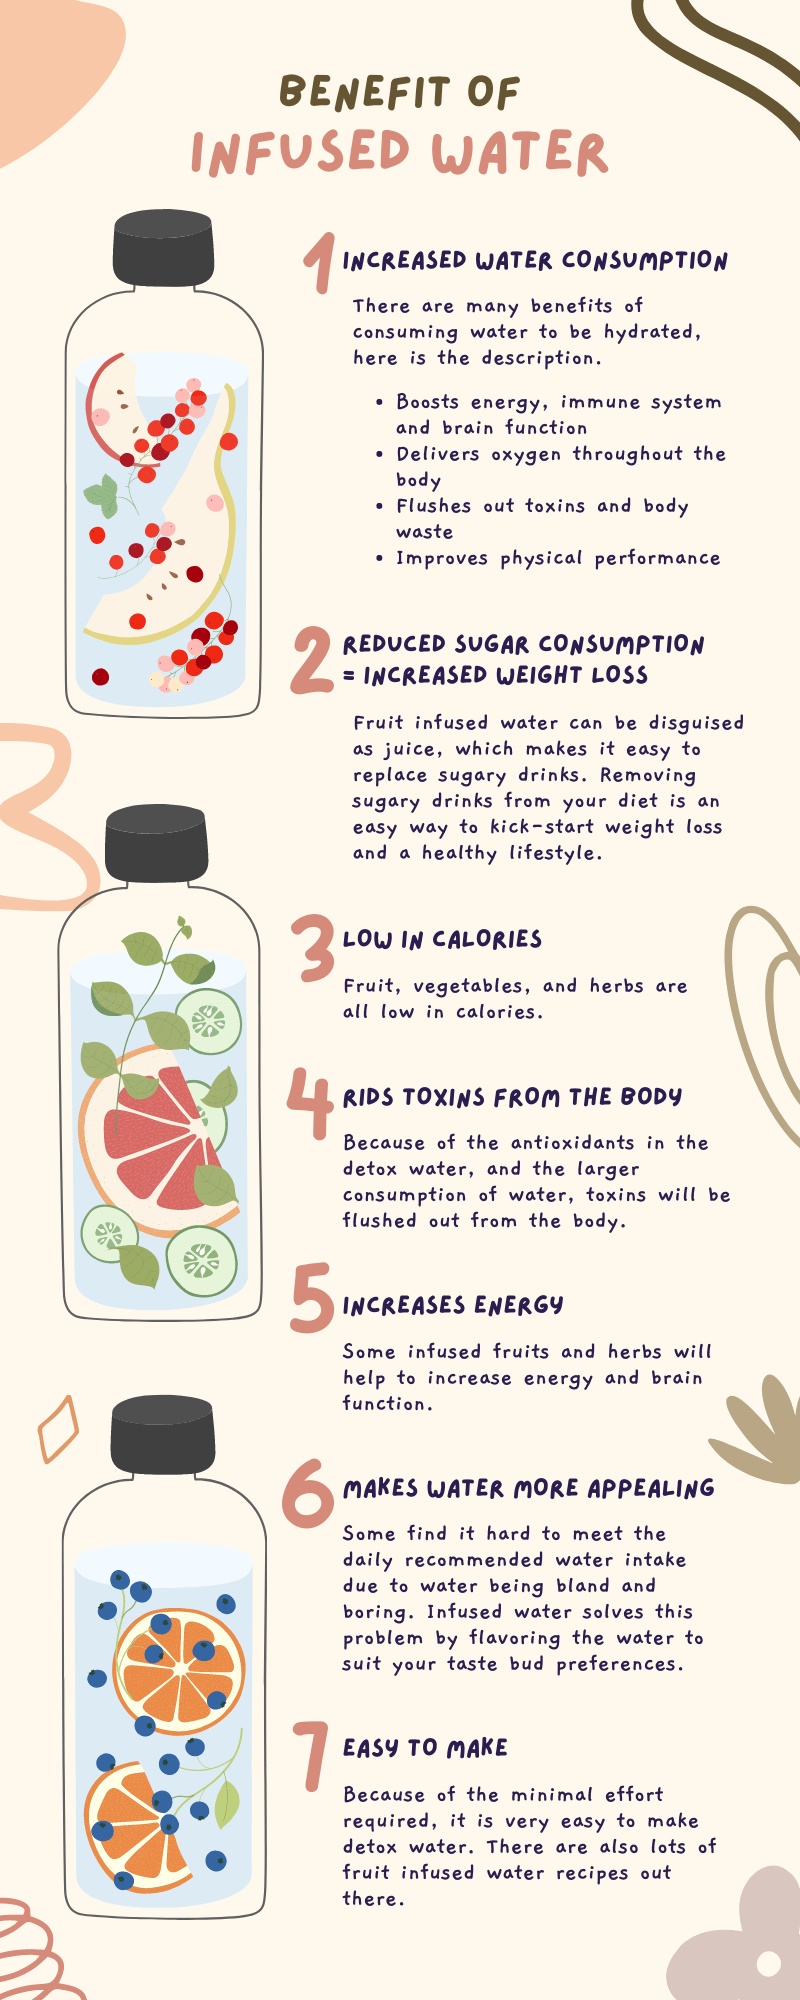 Benefits of infused water - infographic